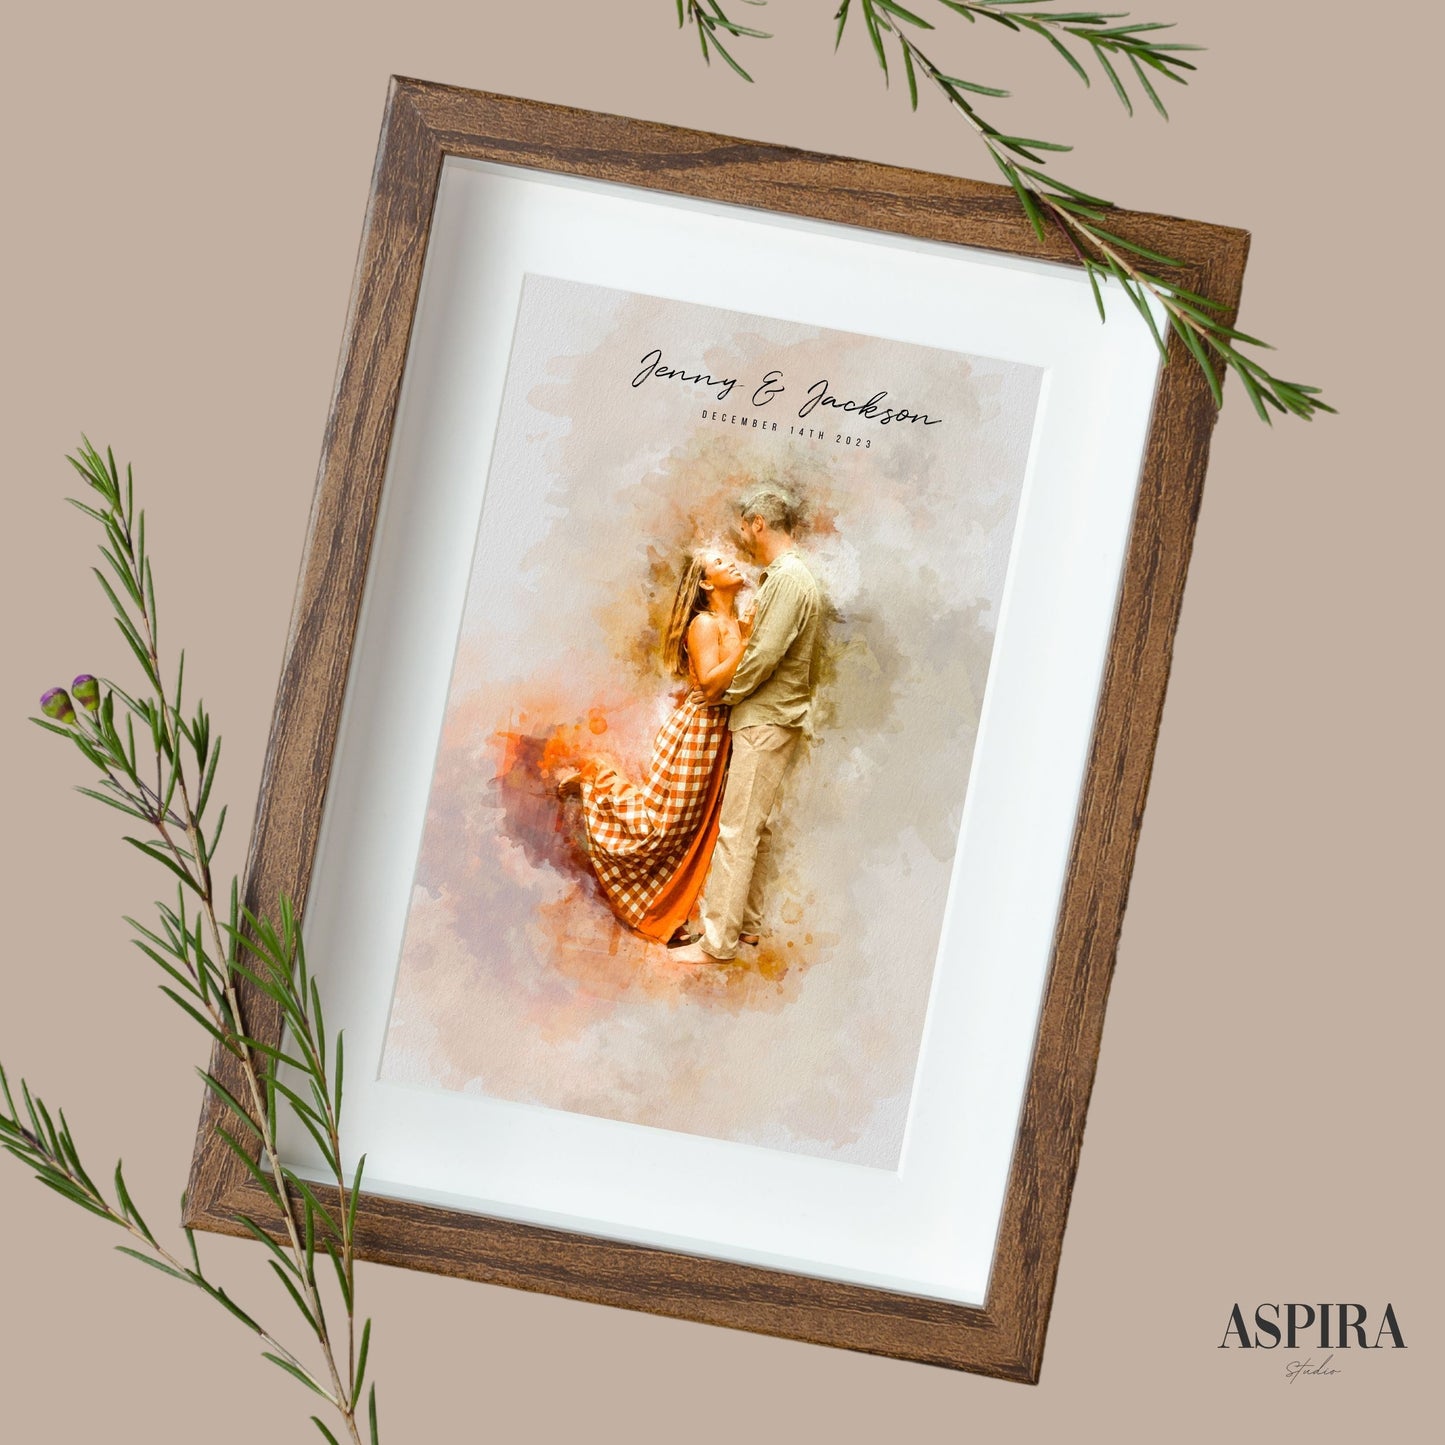 Customized watercolor portraits: Unique gifts for all occasions